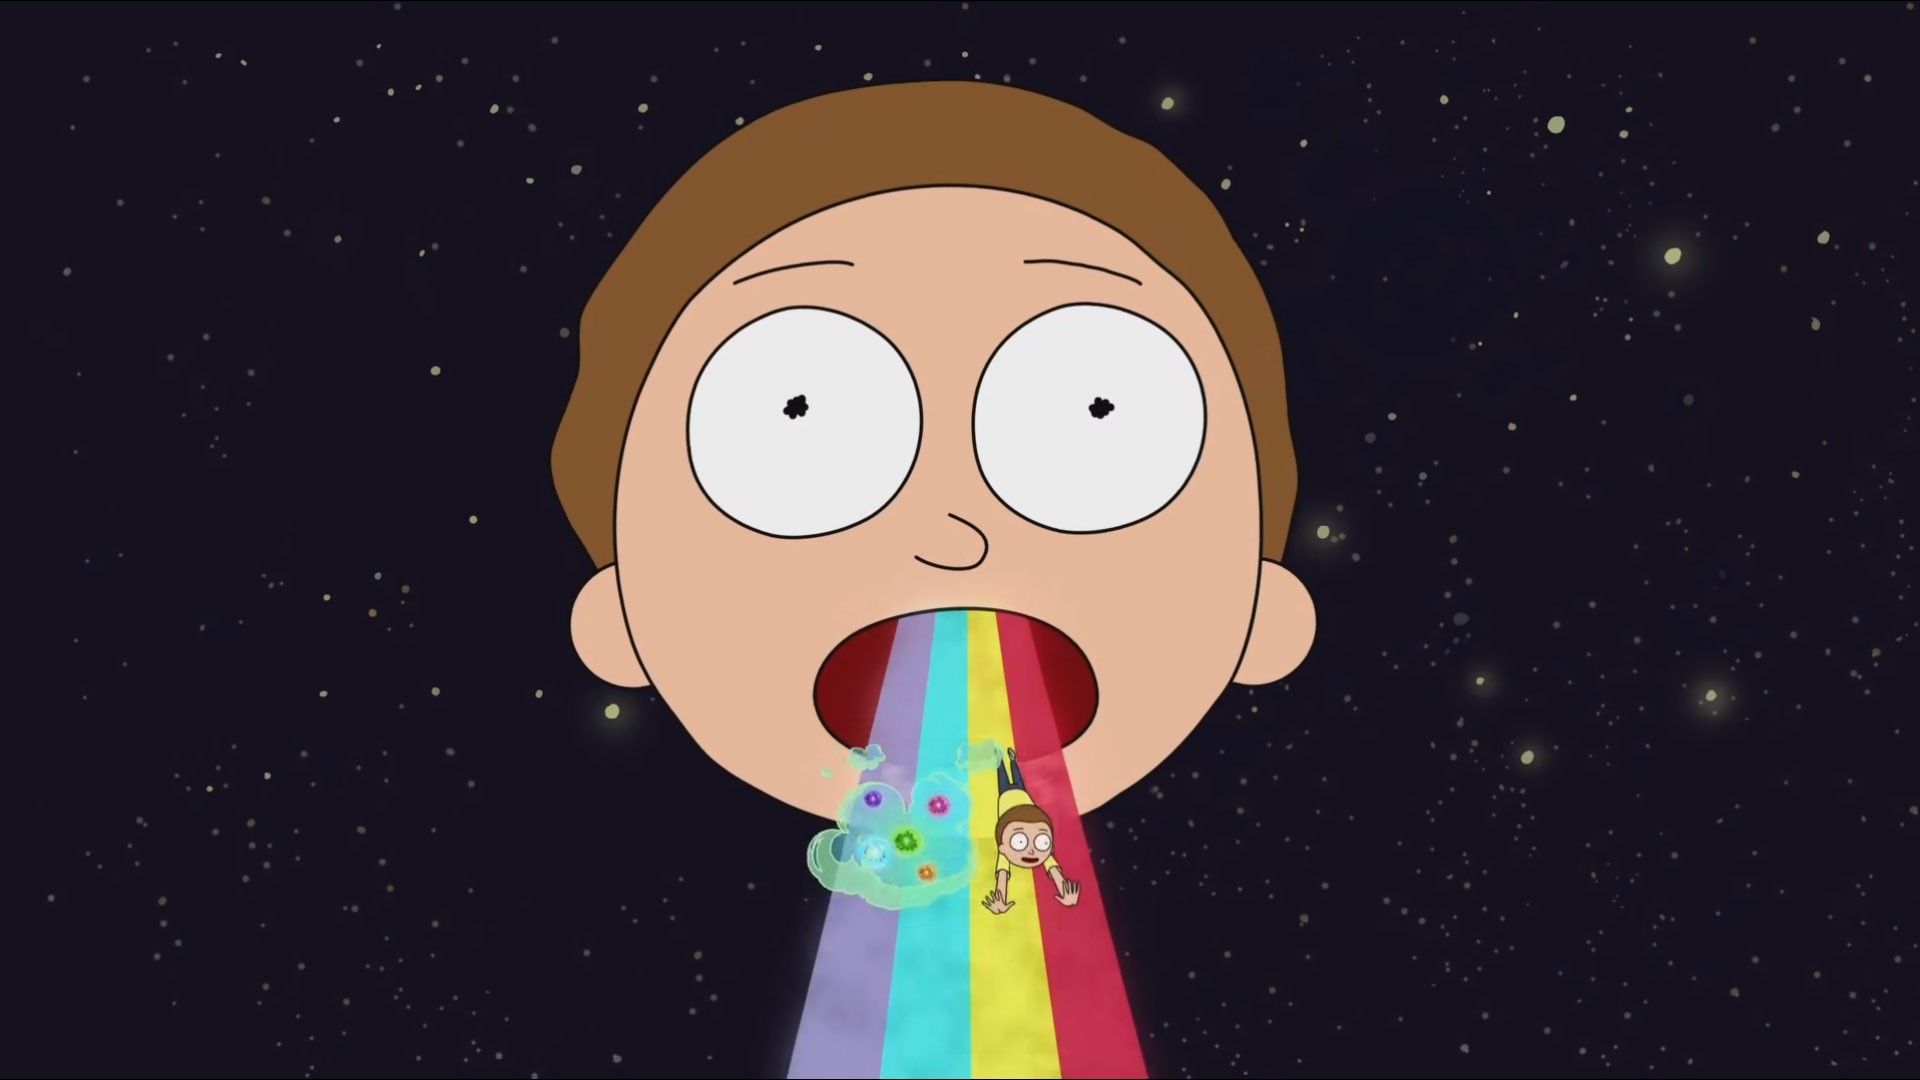 ricky and morty wallpapers hd 4k 14